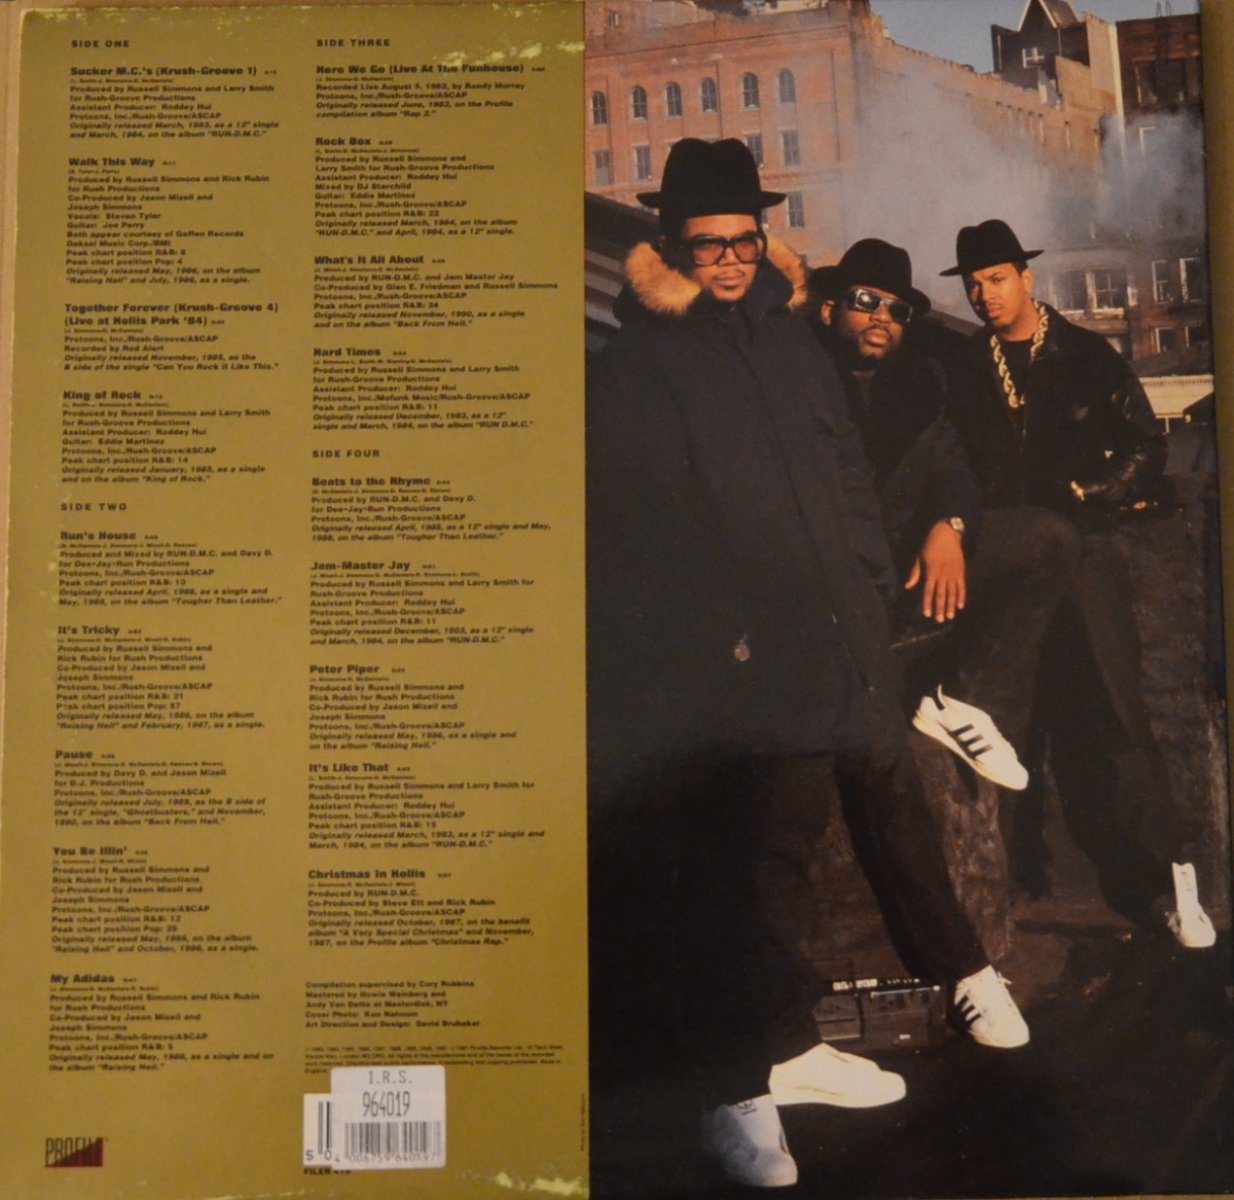 RUN-DMC ‎/ TOGETHER FOREVER - GREATEST HITS 1983-1991 (2LP) - HIP TANK  RECORDS